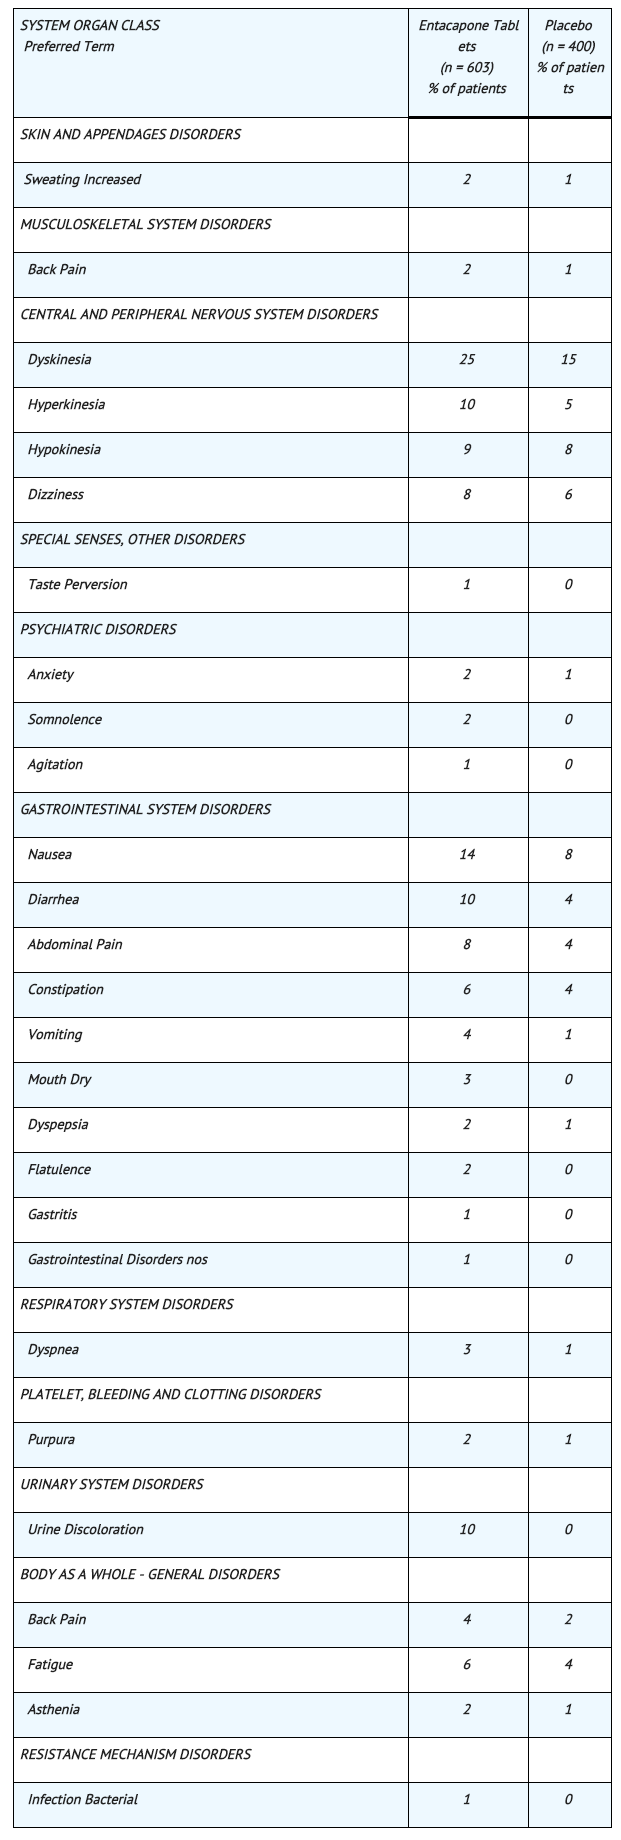 File:Entacapone Adv eff Table 4.png